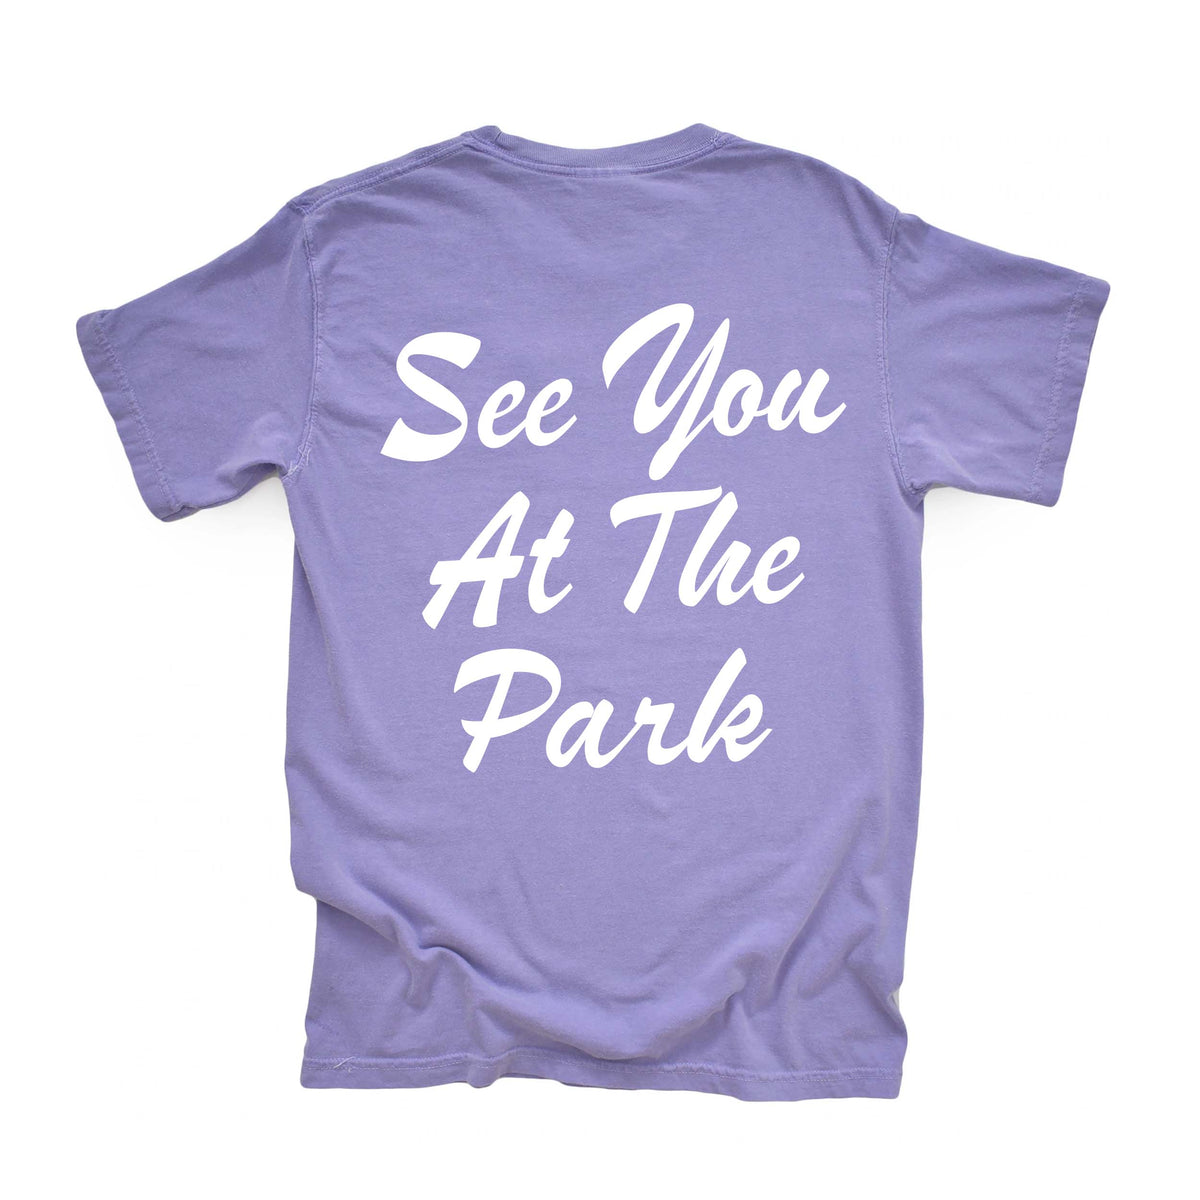 See You At The Park Tee